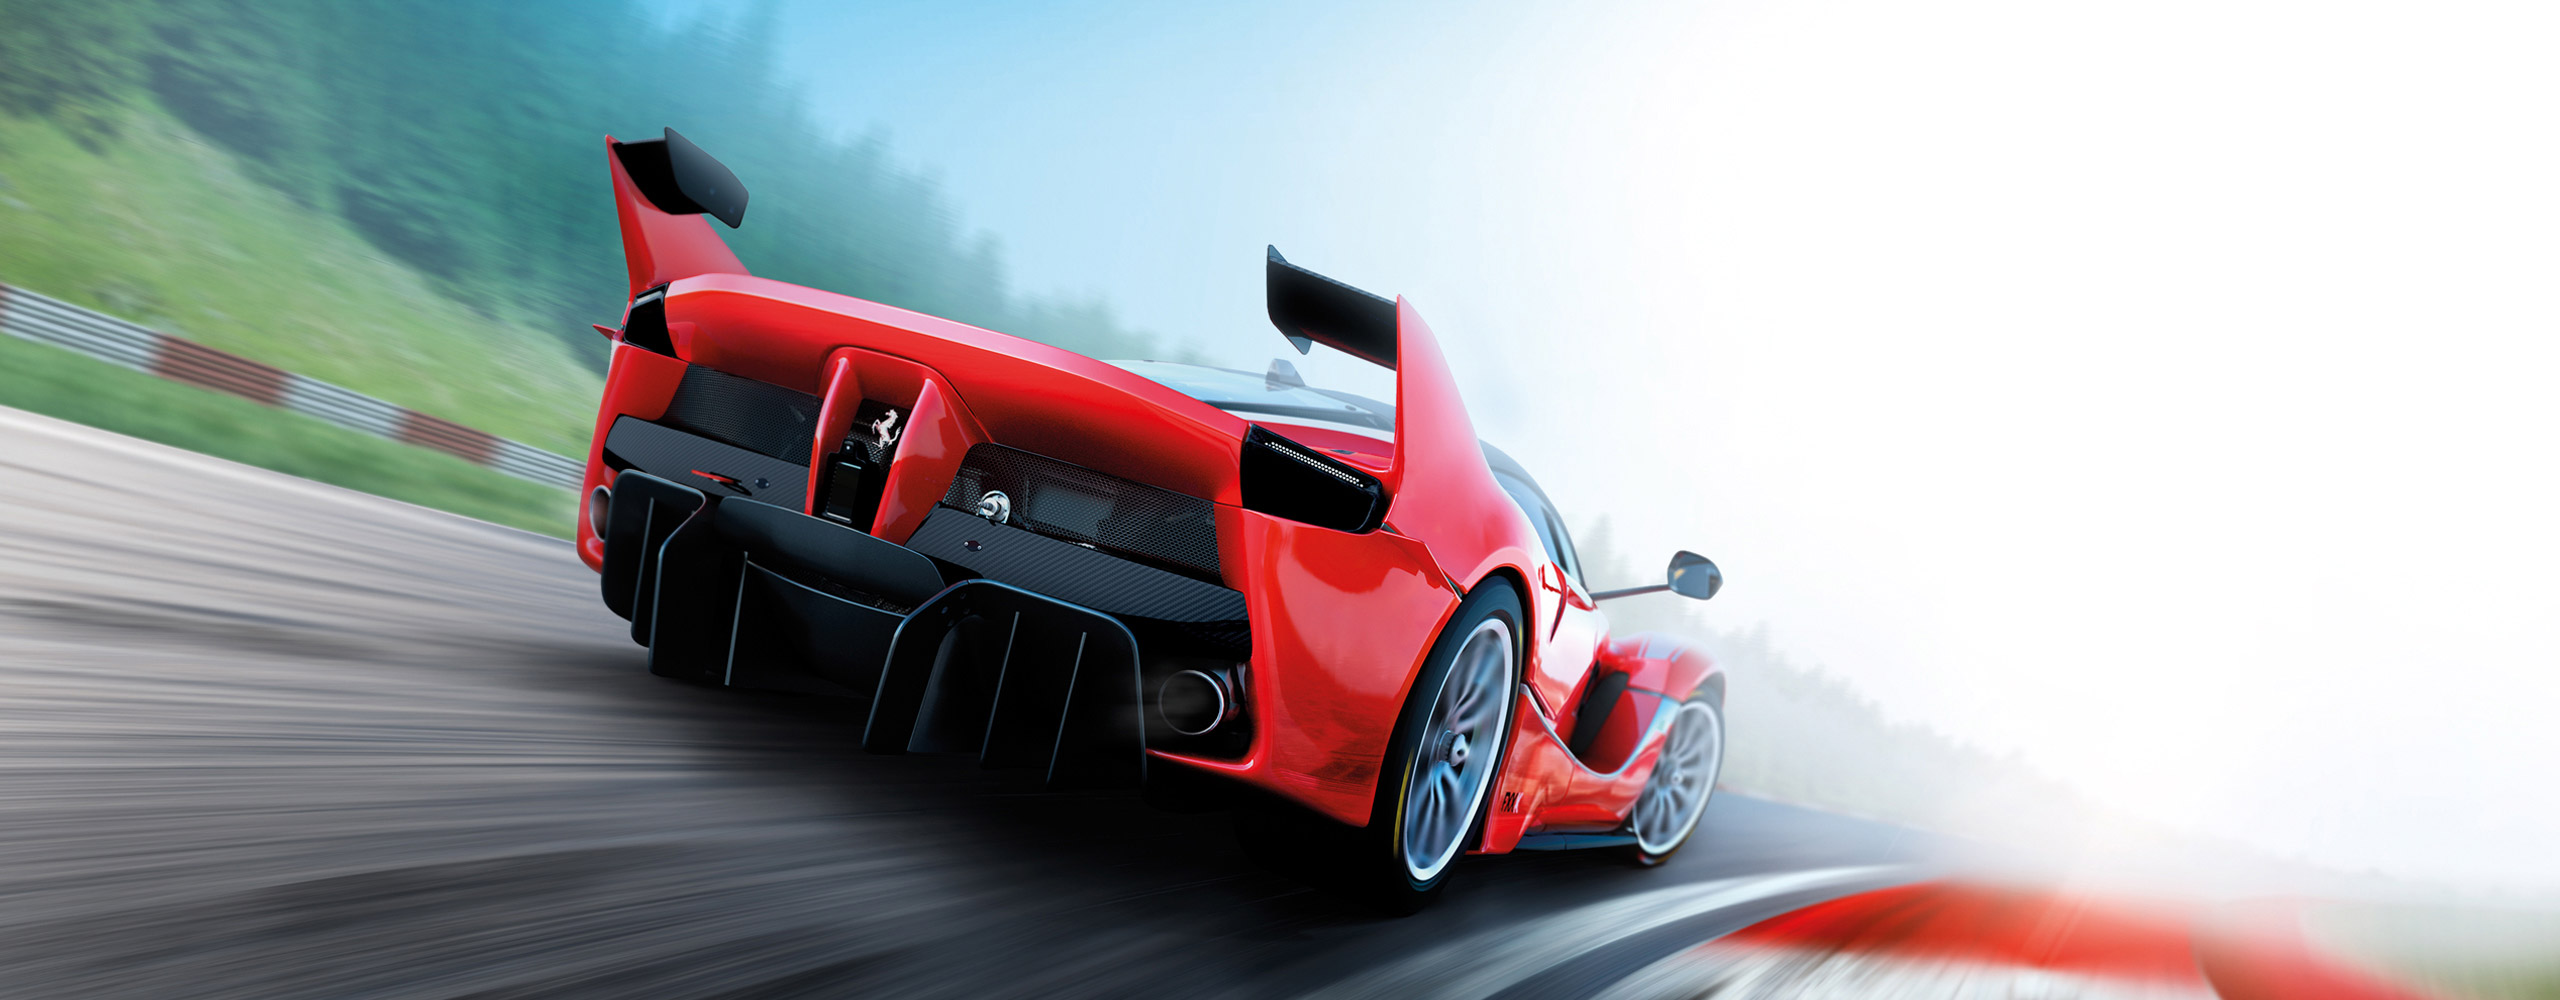 collection of best Assetto Corsa HD wallpaper